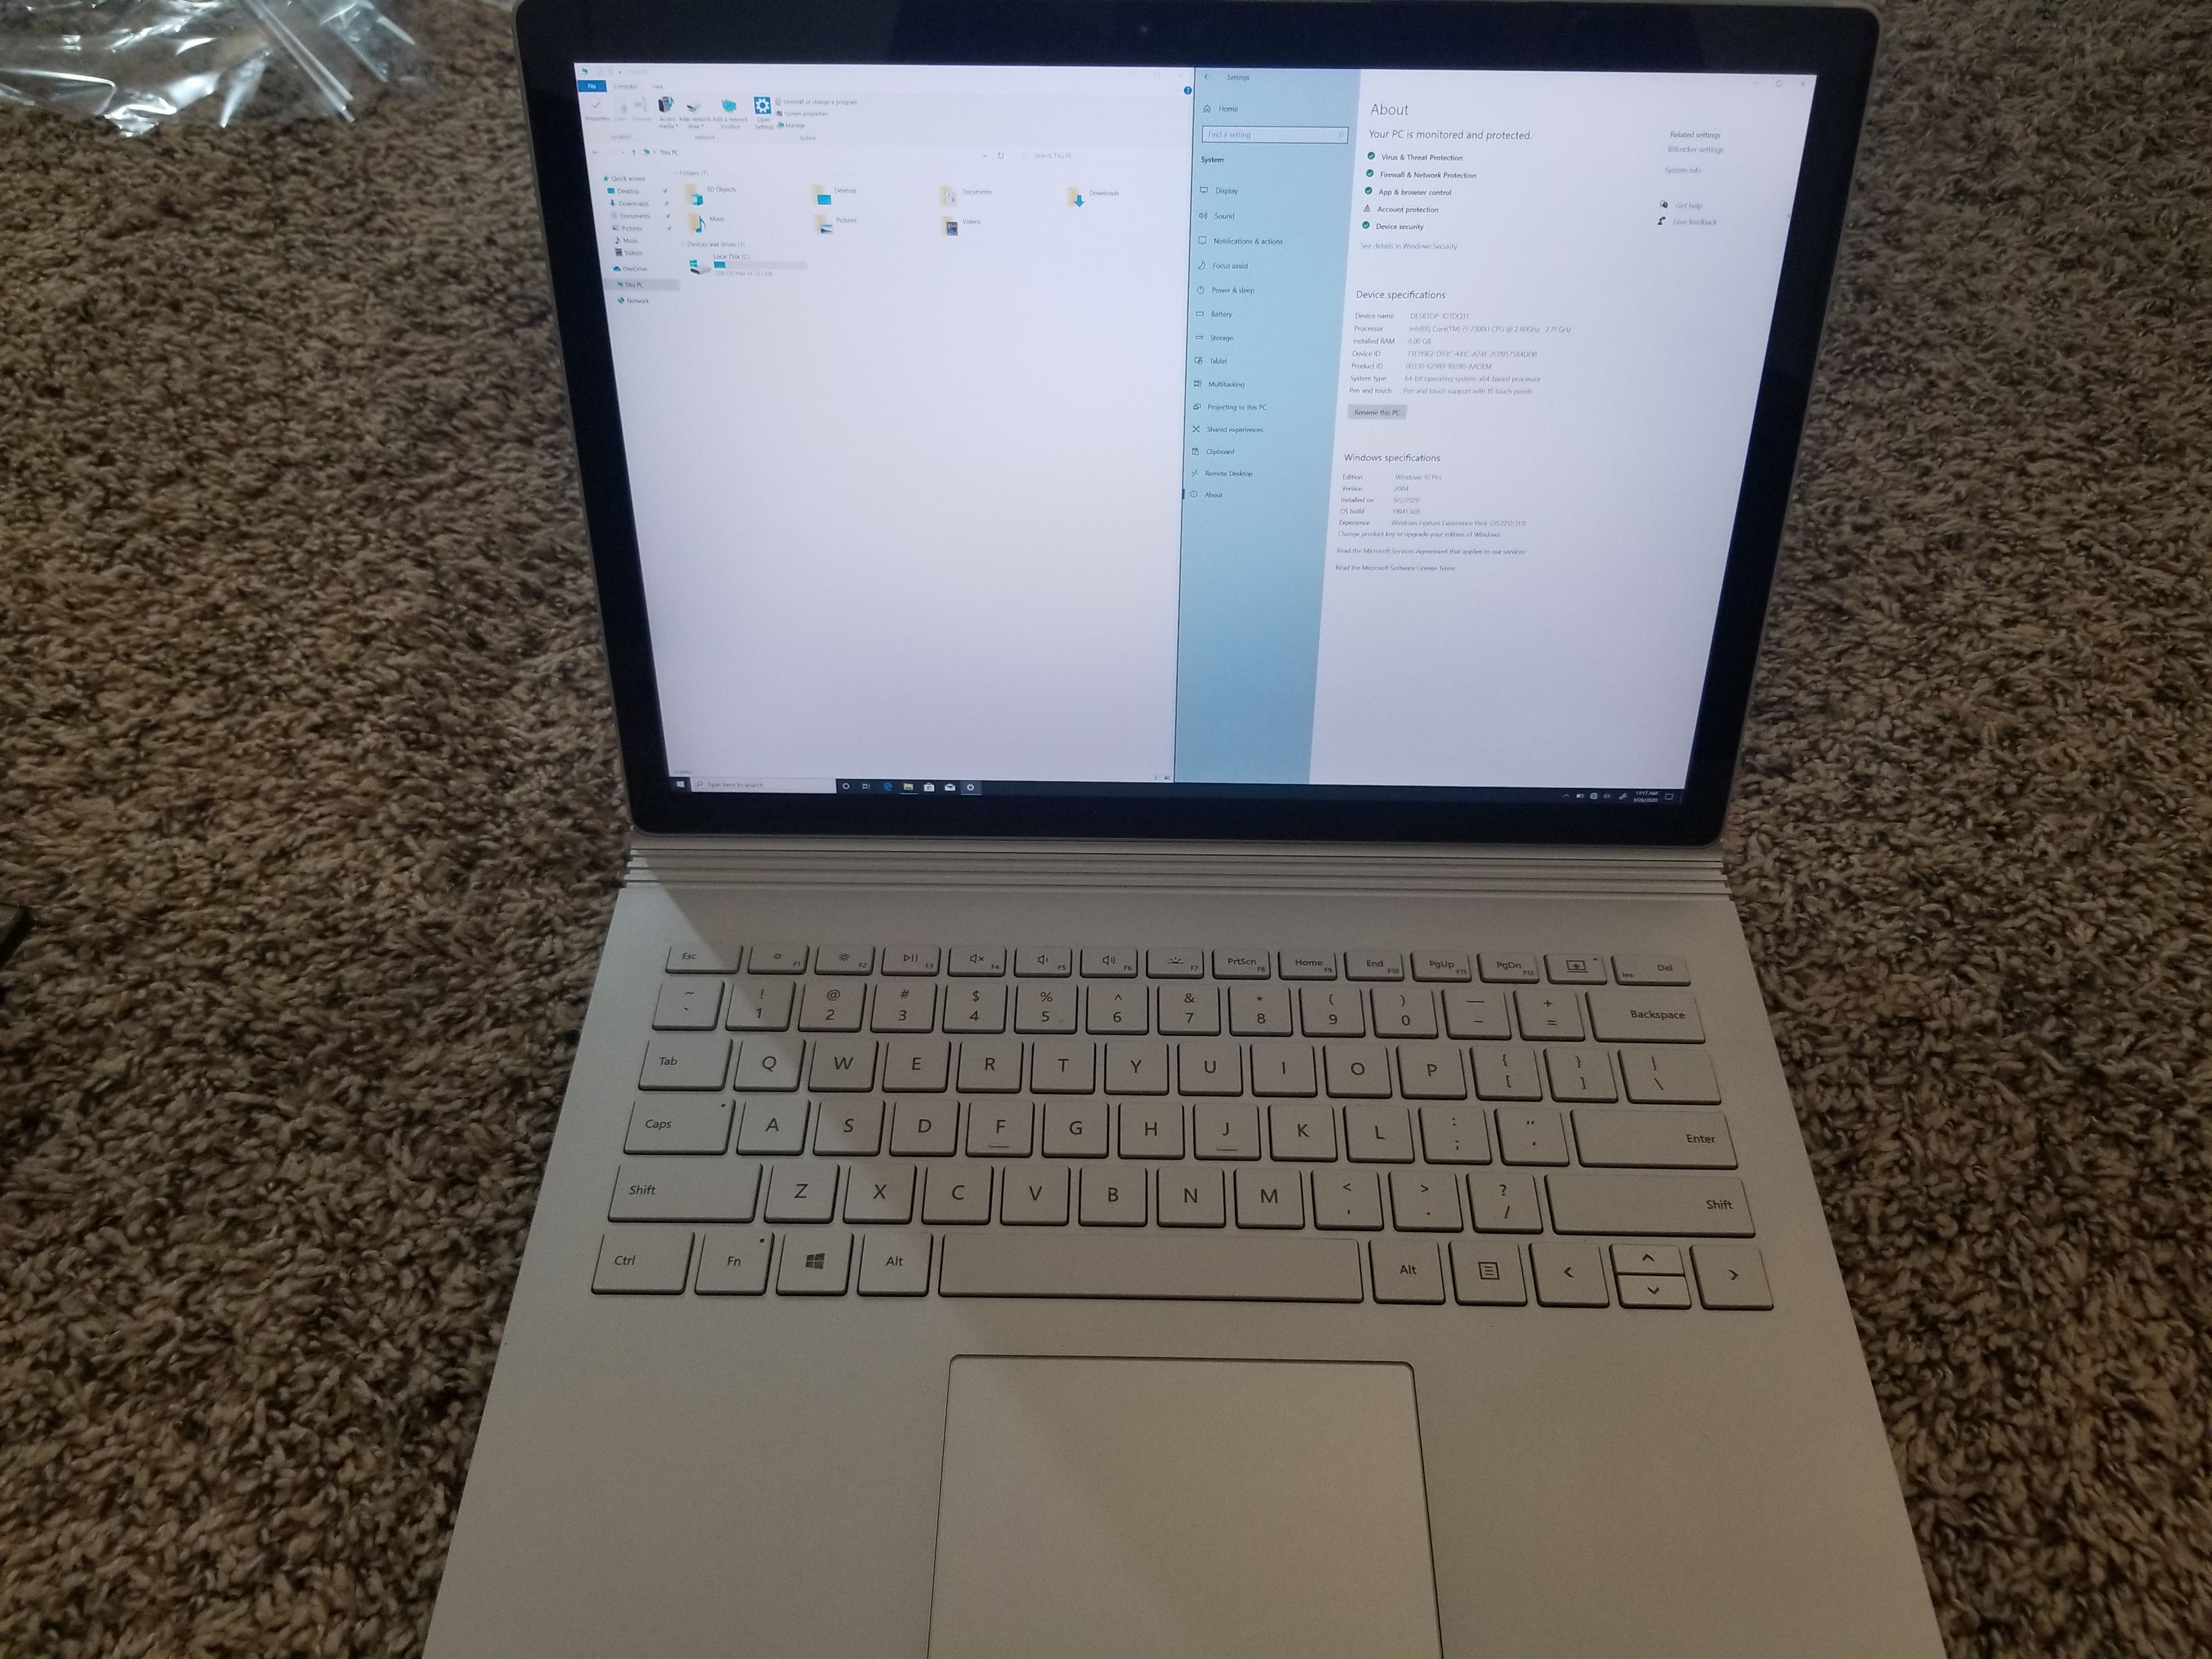 Microsoft Surface Book 2 13.5, i5, 8gb, 256gb ssd, with Pen and Keyboard